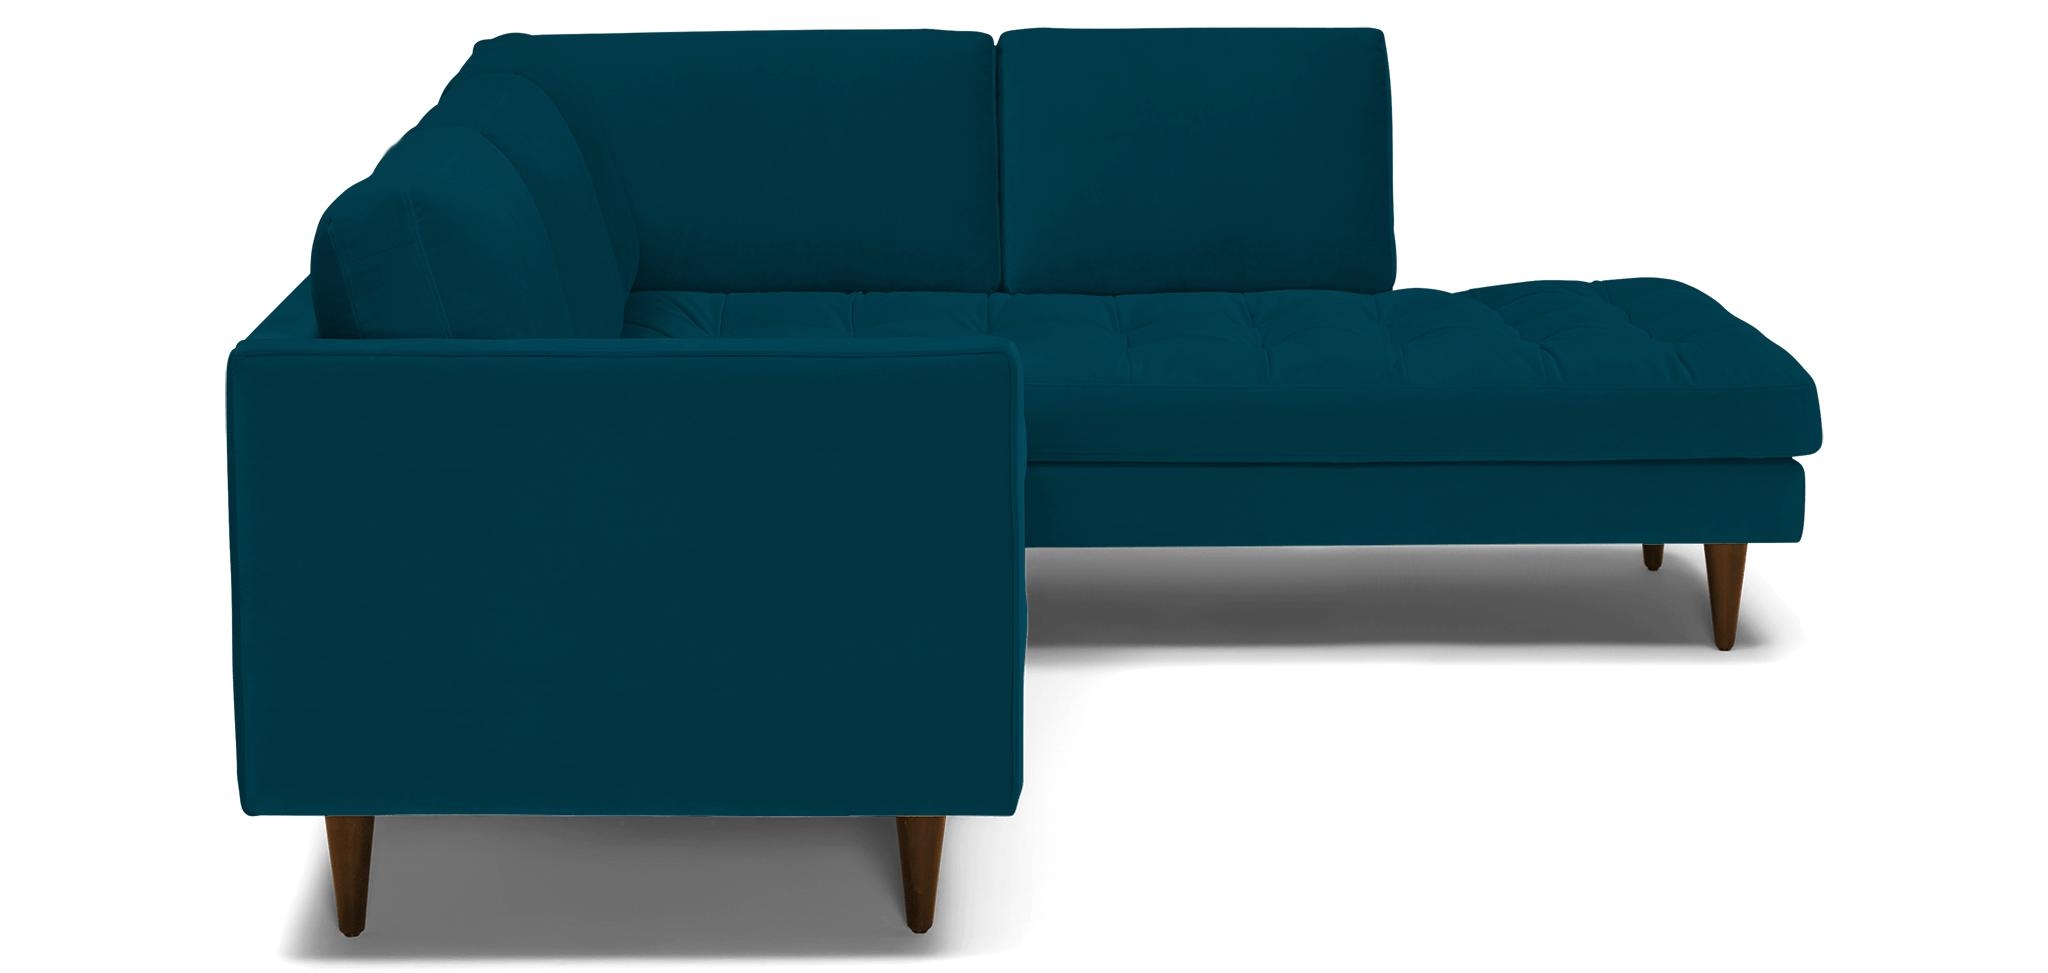 Blue Briar Mid Century Modern Sectional with Bumper - Key Largo Zenith Teal - Mocha - Right  - Image 2